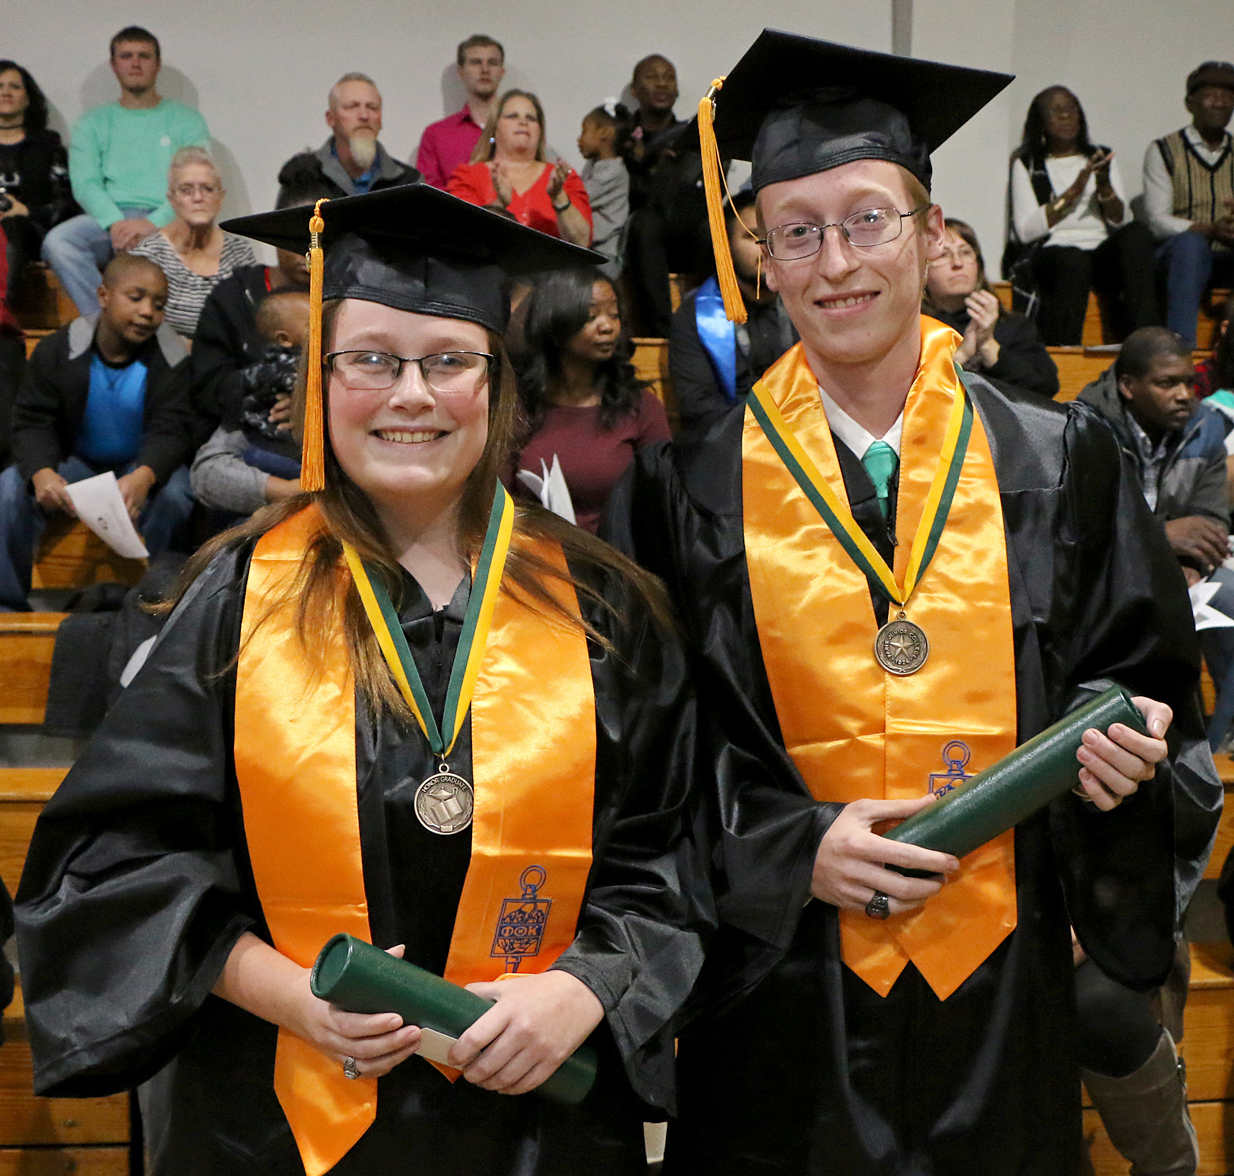 17-year-old Twins Rachel and Samuel Stanley of Sulphur Springs Among PJC Graduates